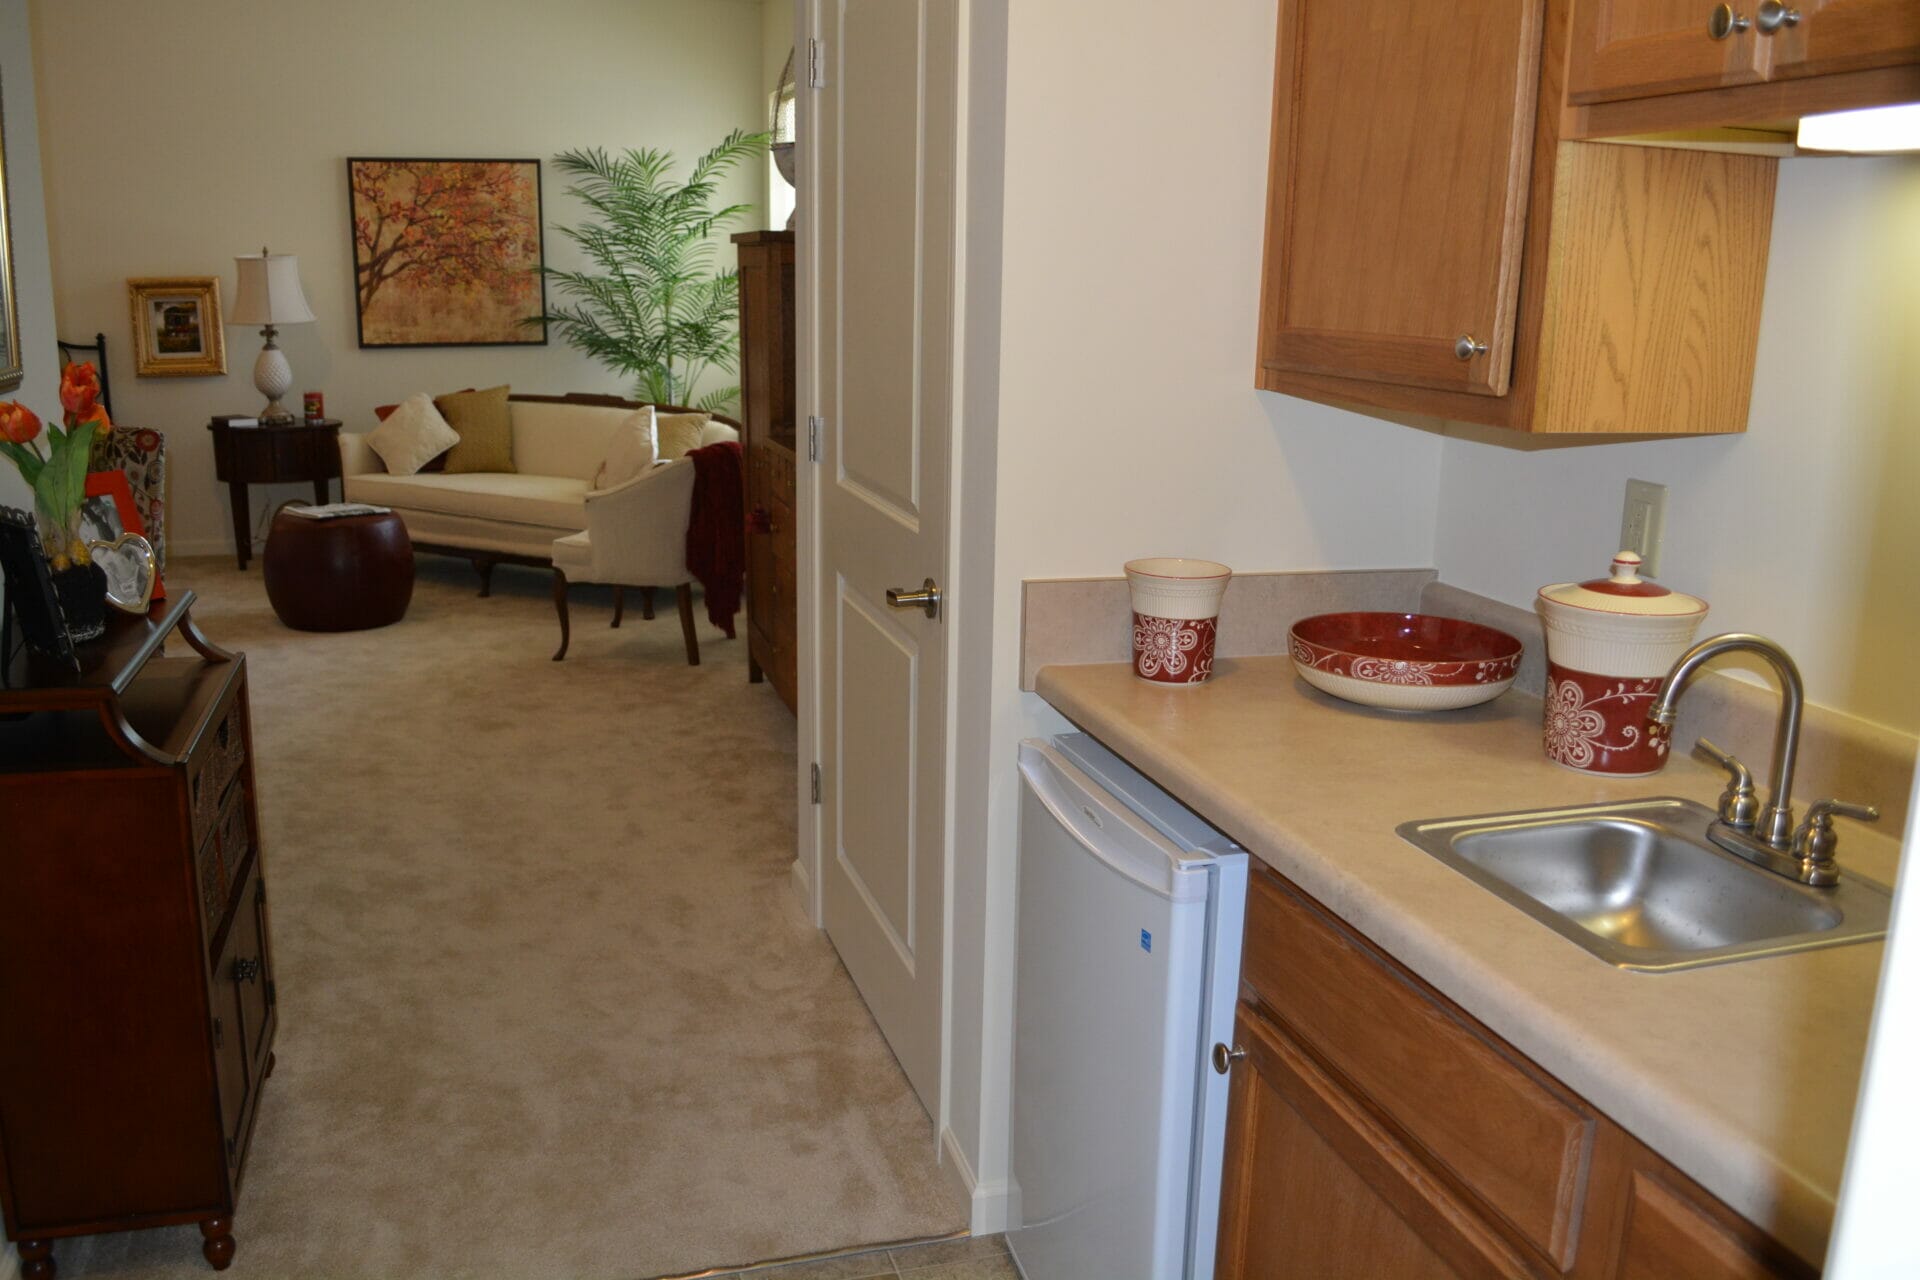 <span  class="uc_style_uc_tiles_grid_image_elementor_uc_items_attribute_title" style="color:#000000;">Allisonville Meadows Assisted Living apartment view of the living room from kitchenette. </span>